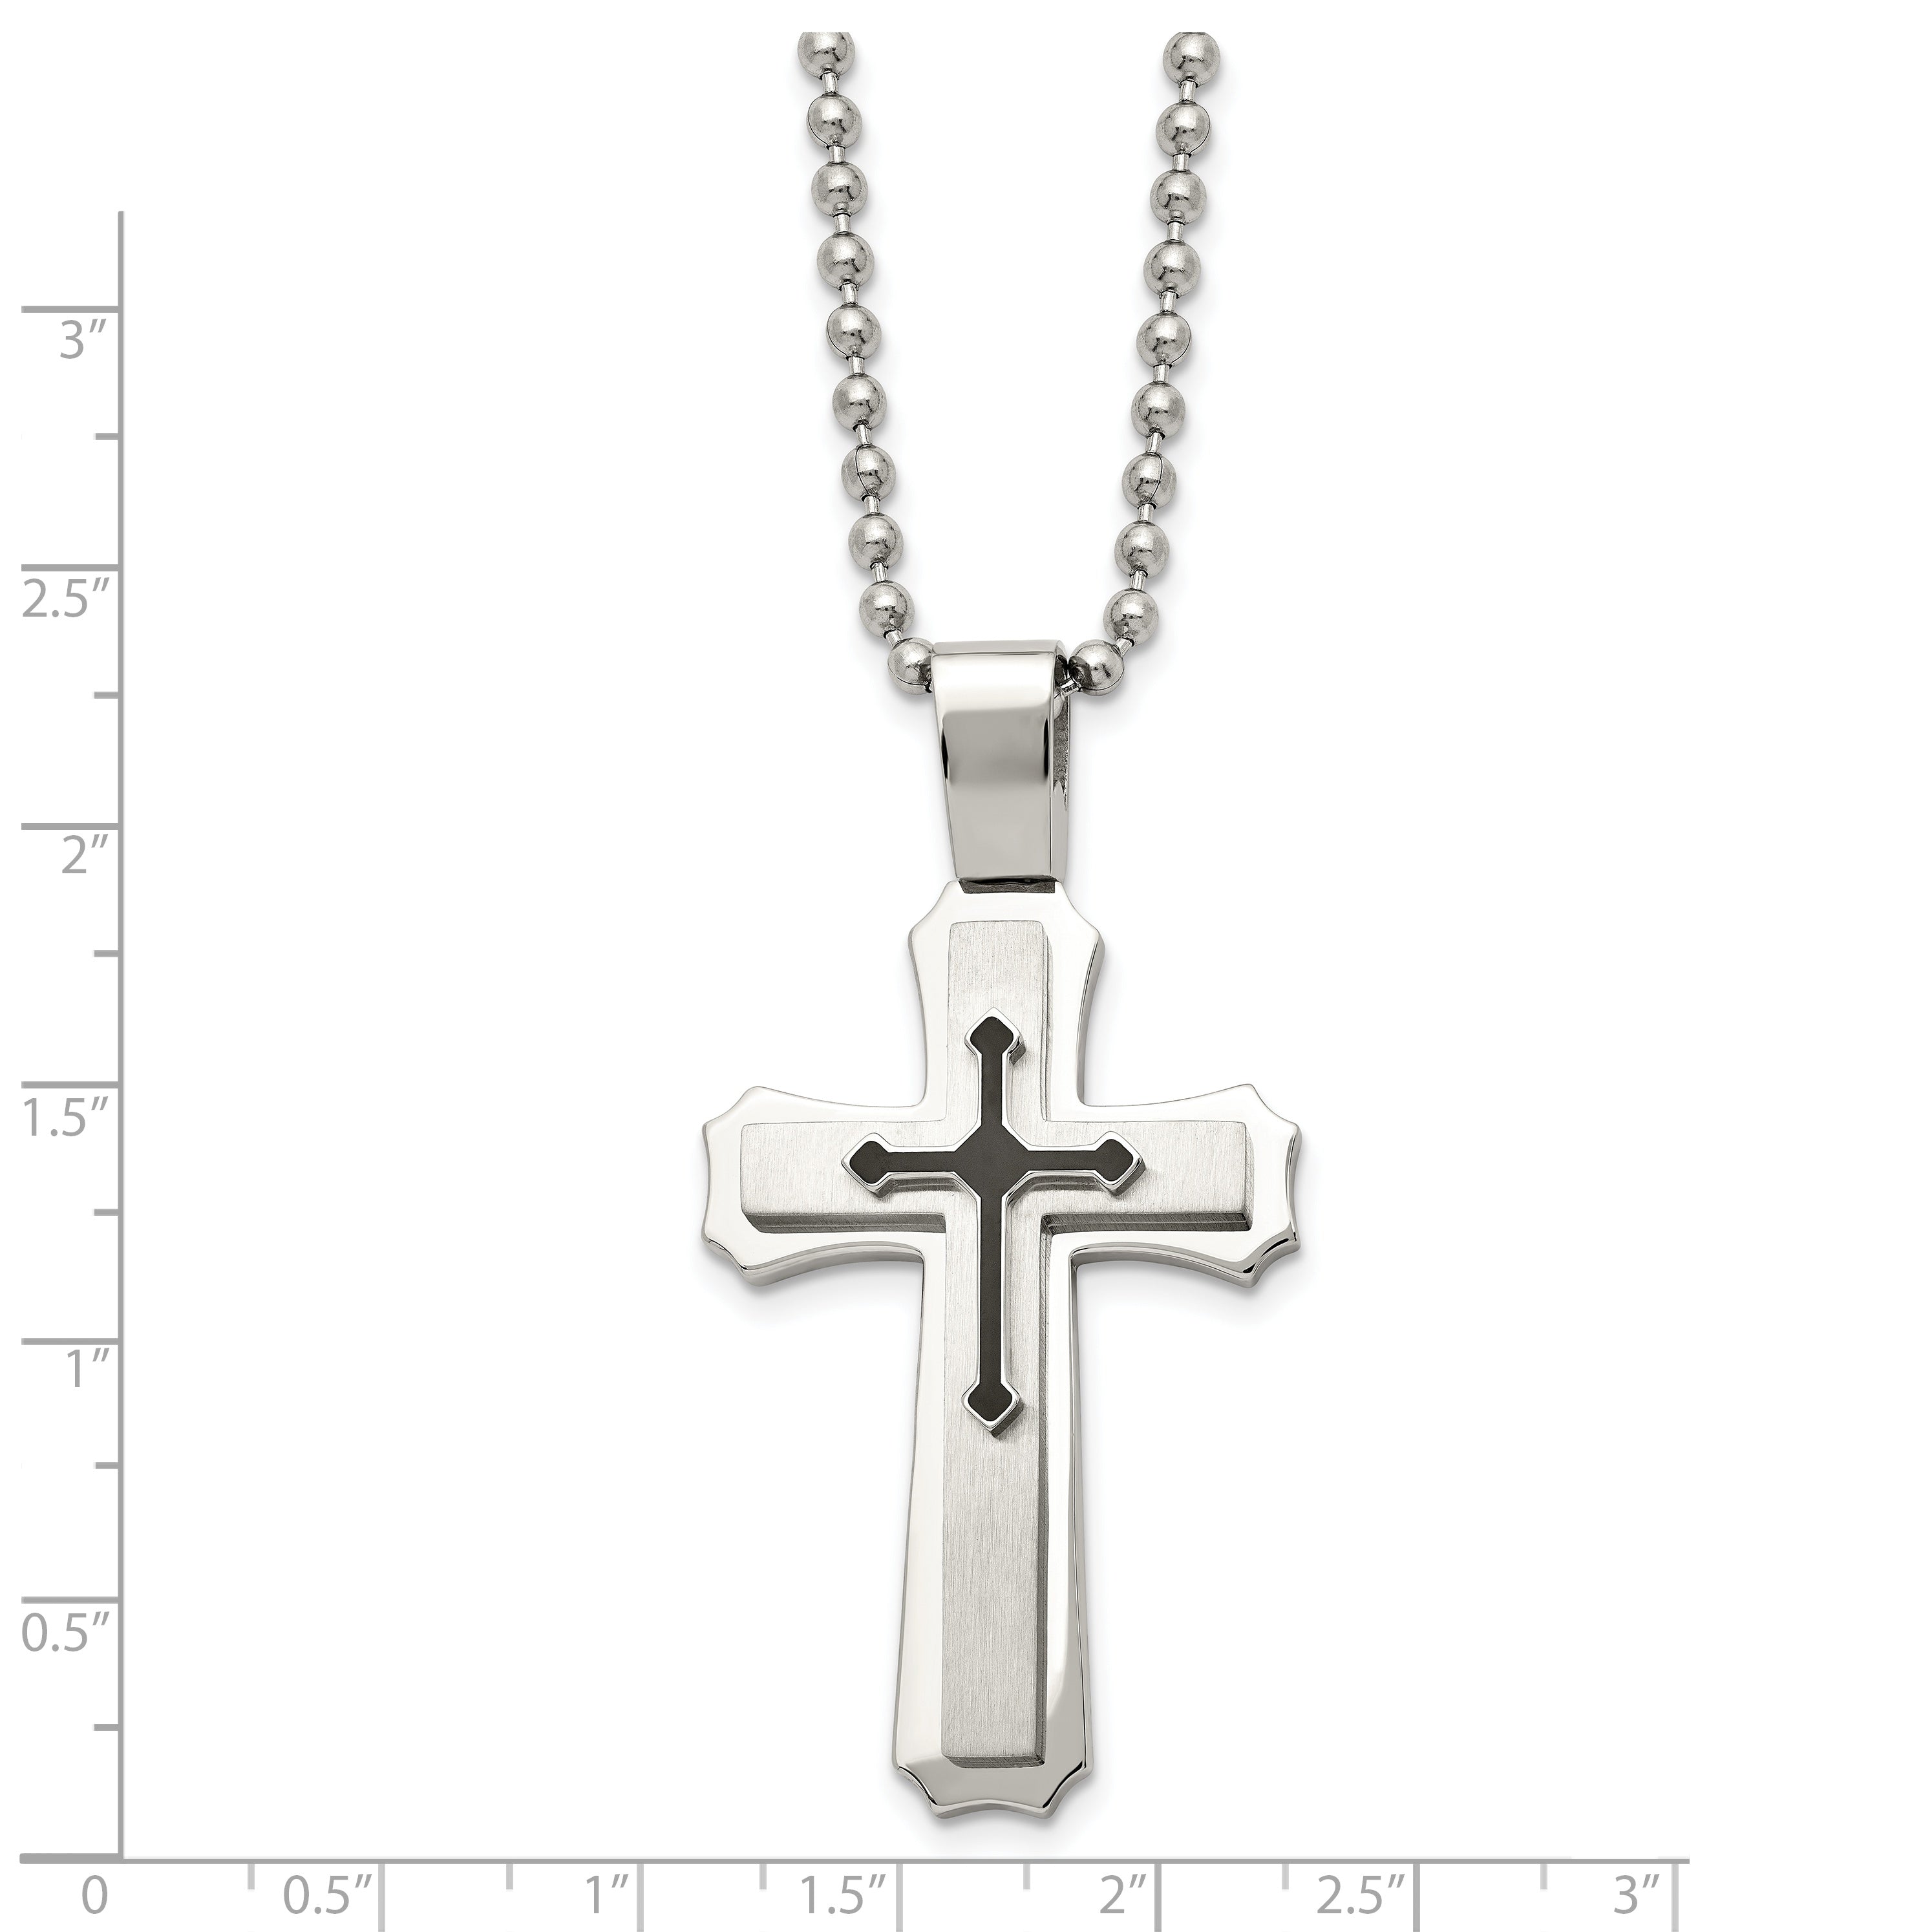 Chisel Stainless Steel Brushed and Polished with Black Rubber Cross Pendant on a 24 inch Ball Chain Necklace